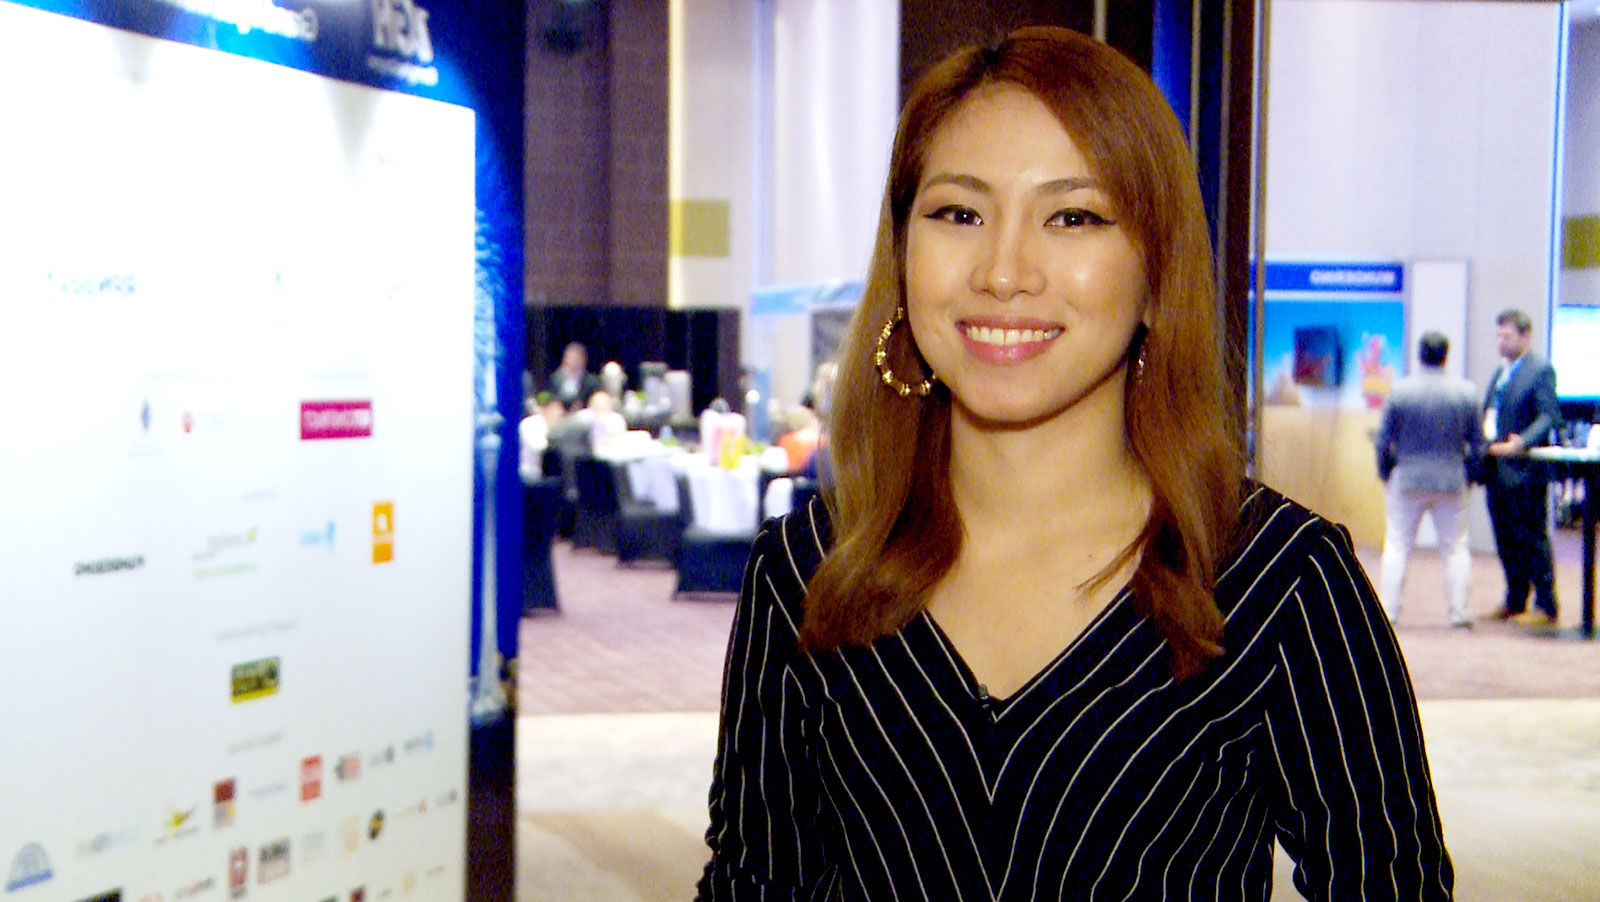 iGaming Asia Congress 2018 day 2 summary